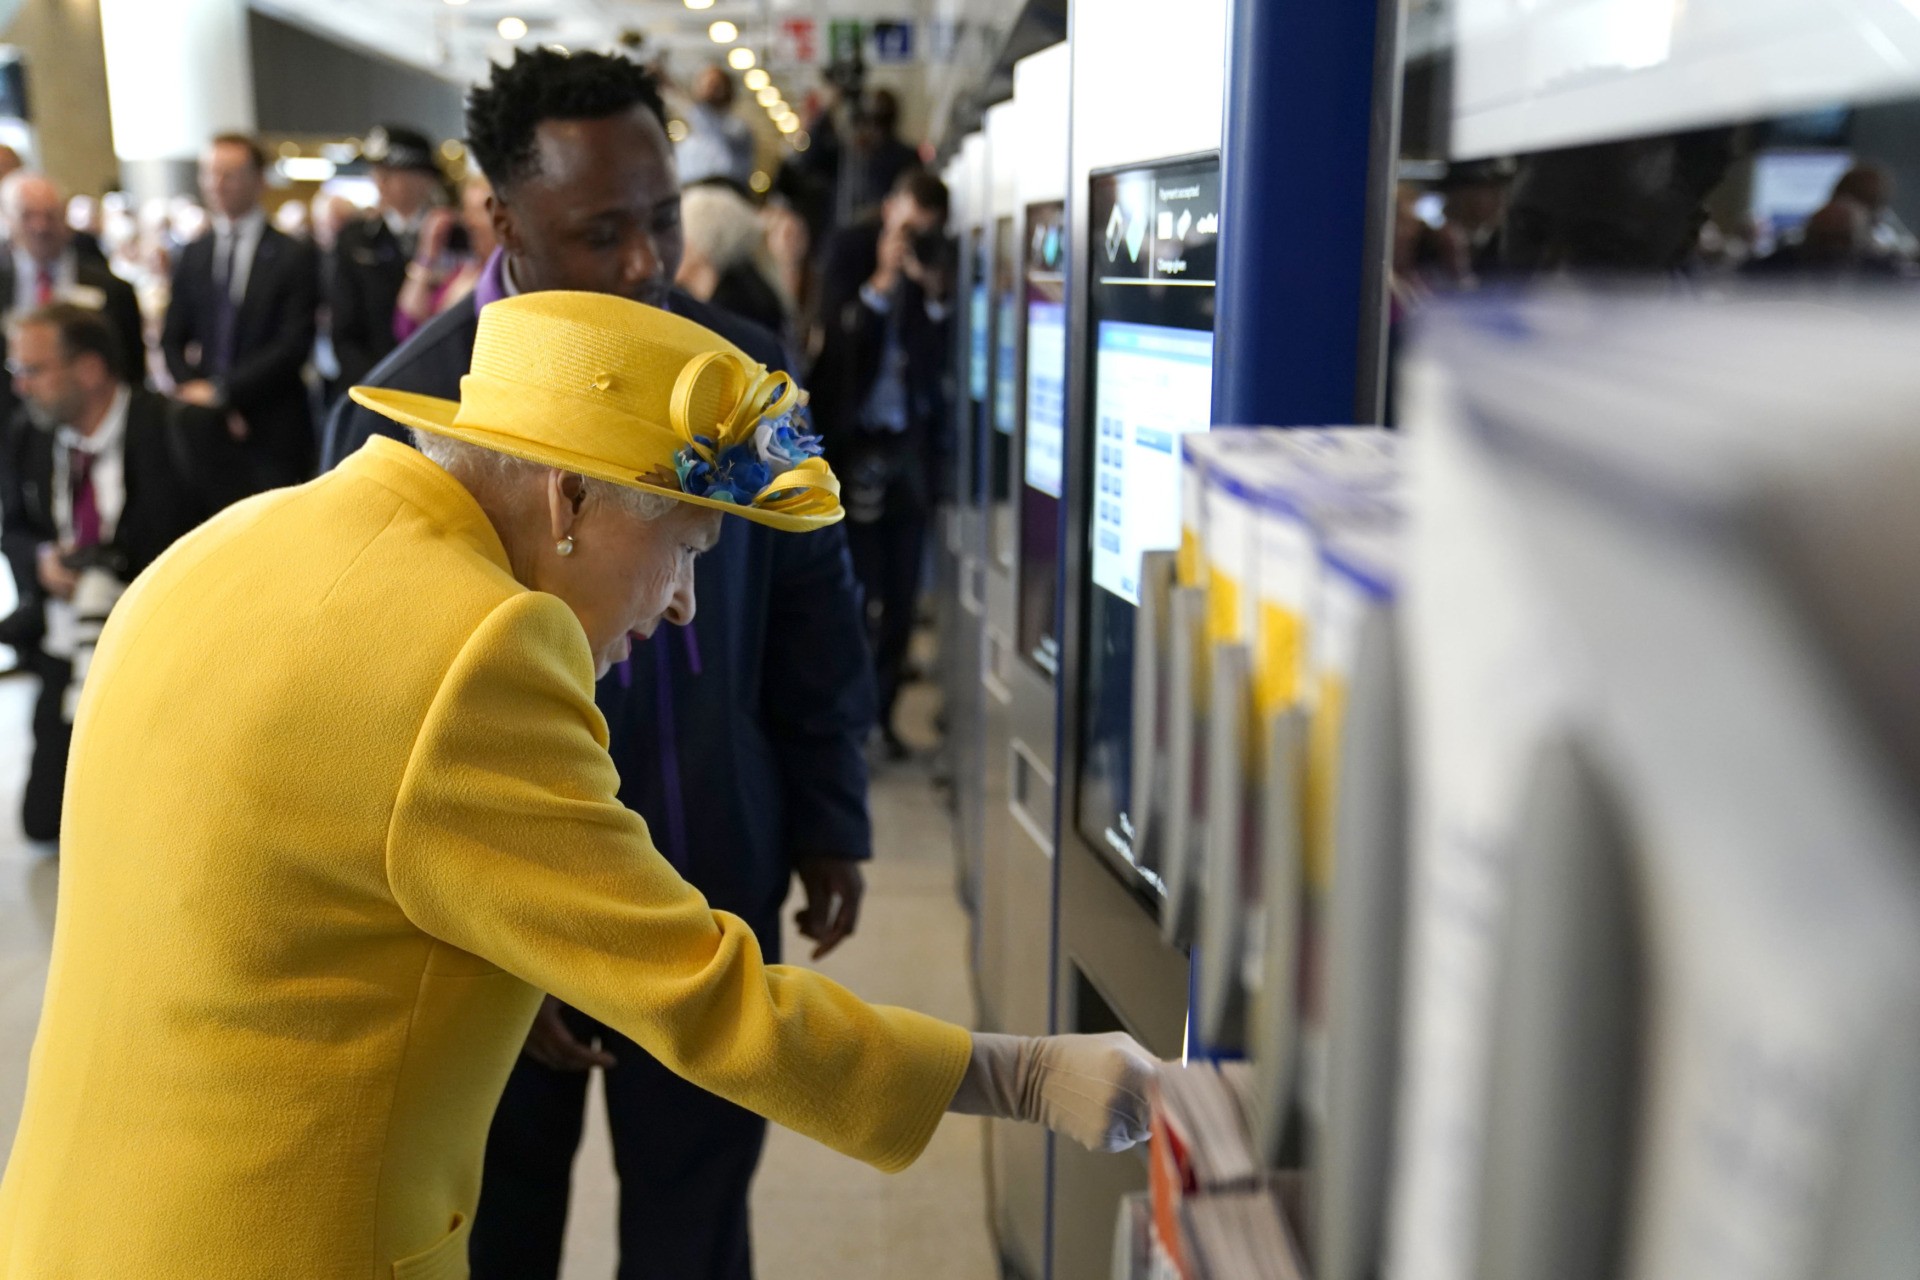 LONDON, ENGLAND - MAY 17: Queen Elizabeth II using a oyster card machine as she attends the Elizabeth line's official opening at Paddington Station on May 17, 2022 in London, England. (Photo by Andrew Matthews - WPA Pool/Getty Images)